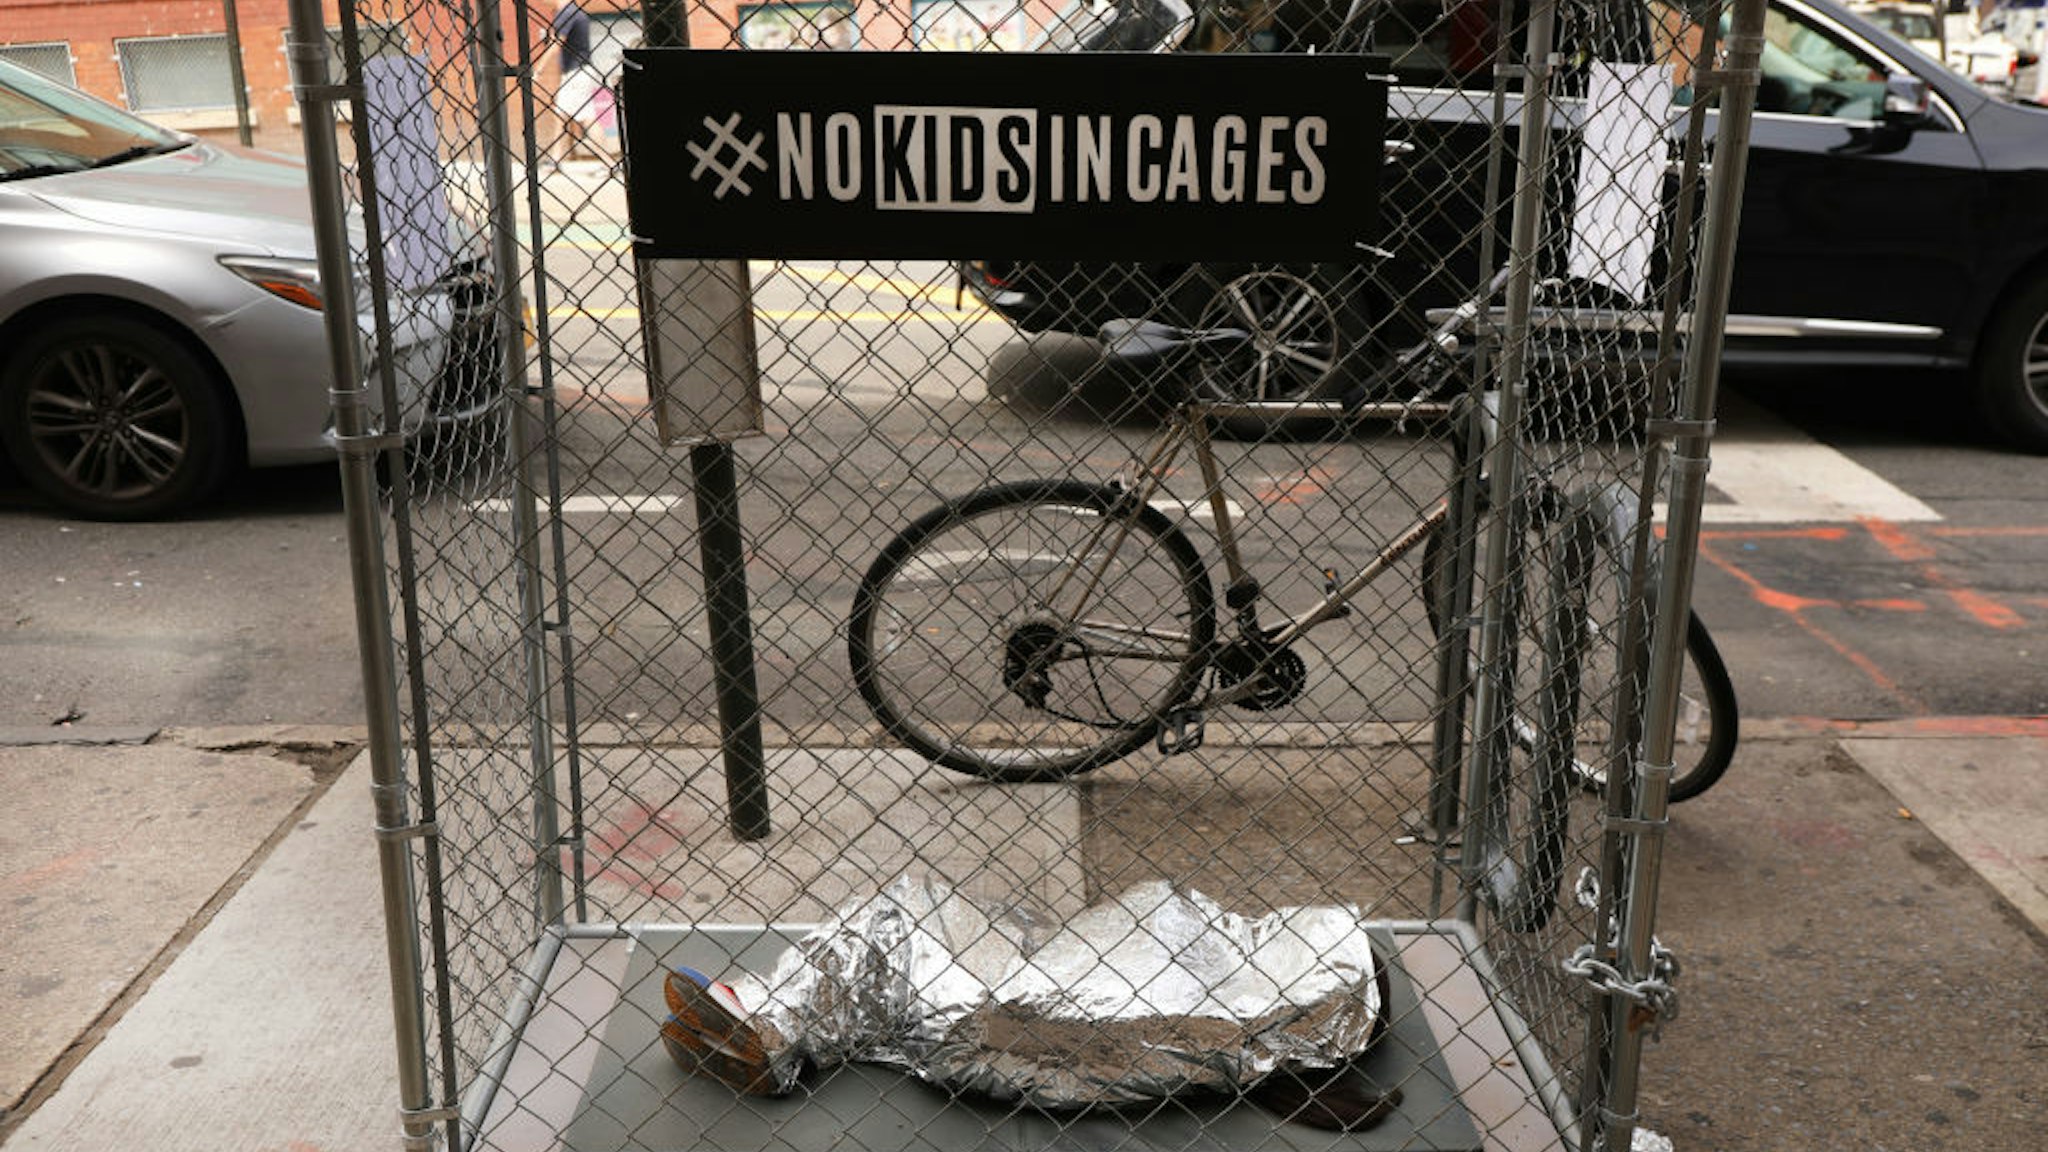 A pop-up art installation depicting a small child curled up underneath a foil survival blanket in a chain-link cage stands along a Brooklyn street on June 12, 2019 in New York City.